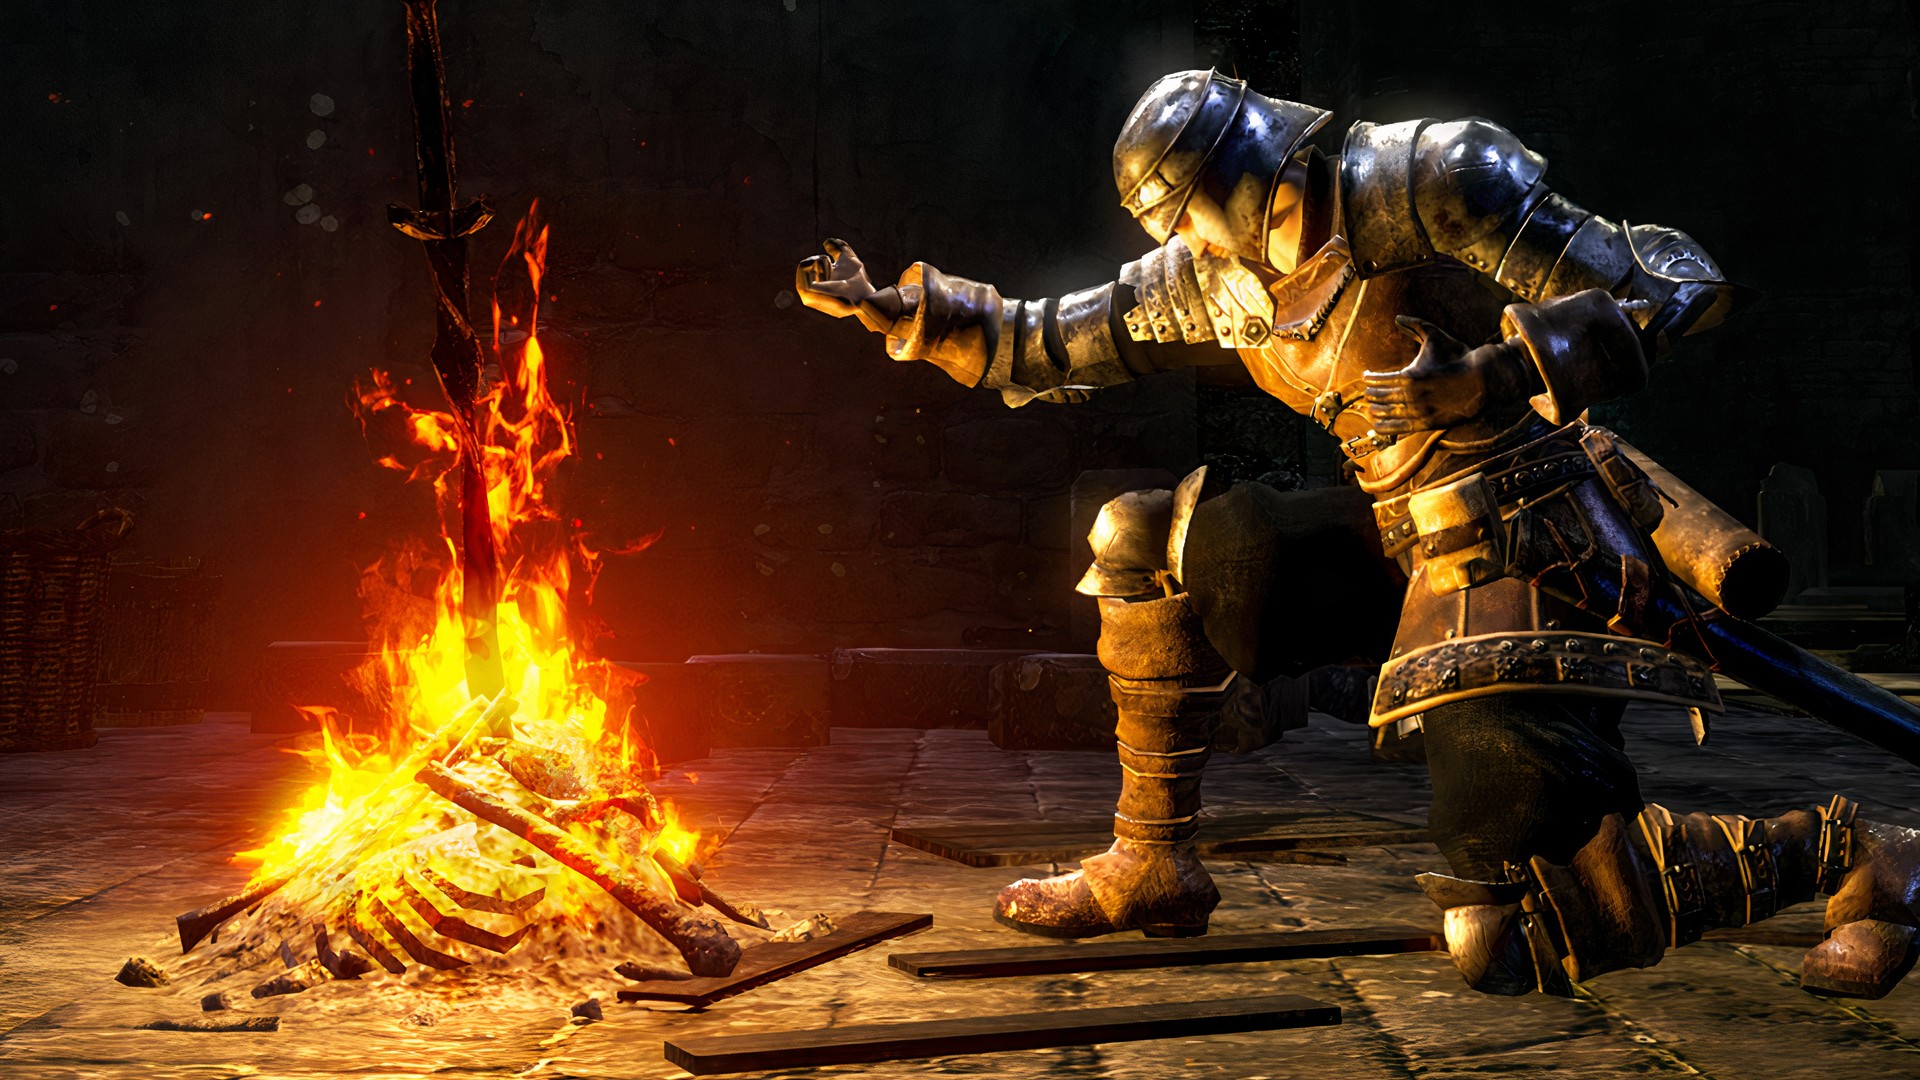 Dark Souls PC servers are never coming back, FromSoftware confirms